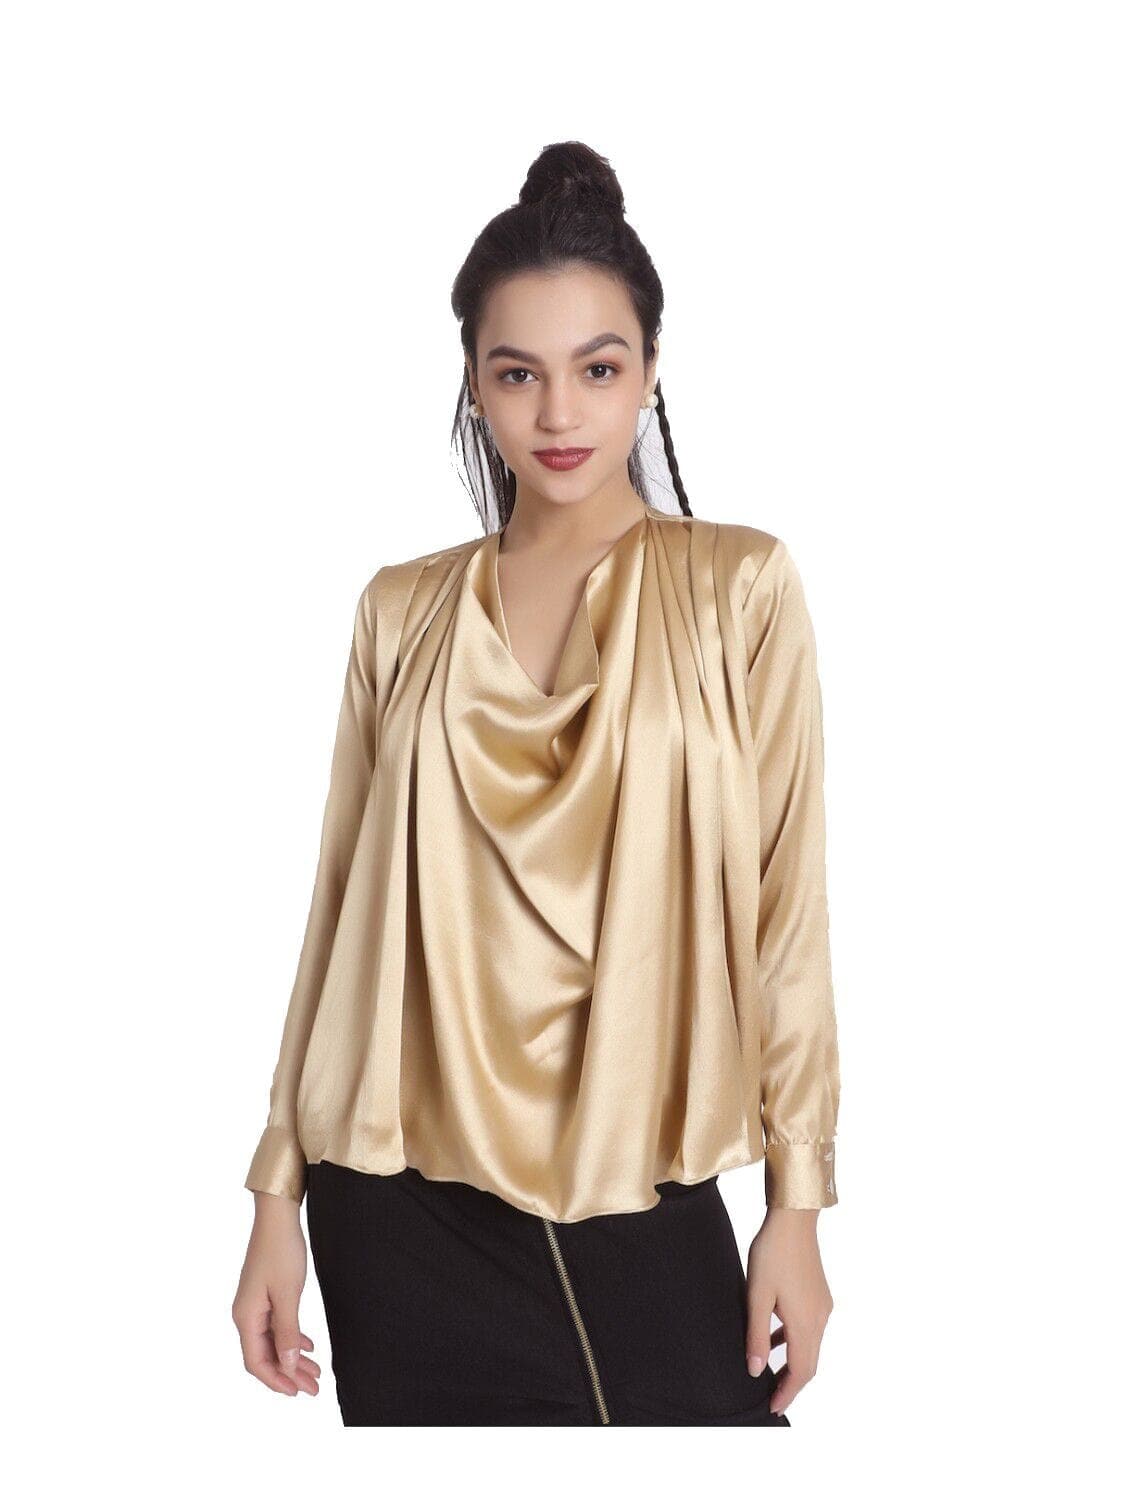 Solid Gold Satin Top - Uptownie